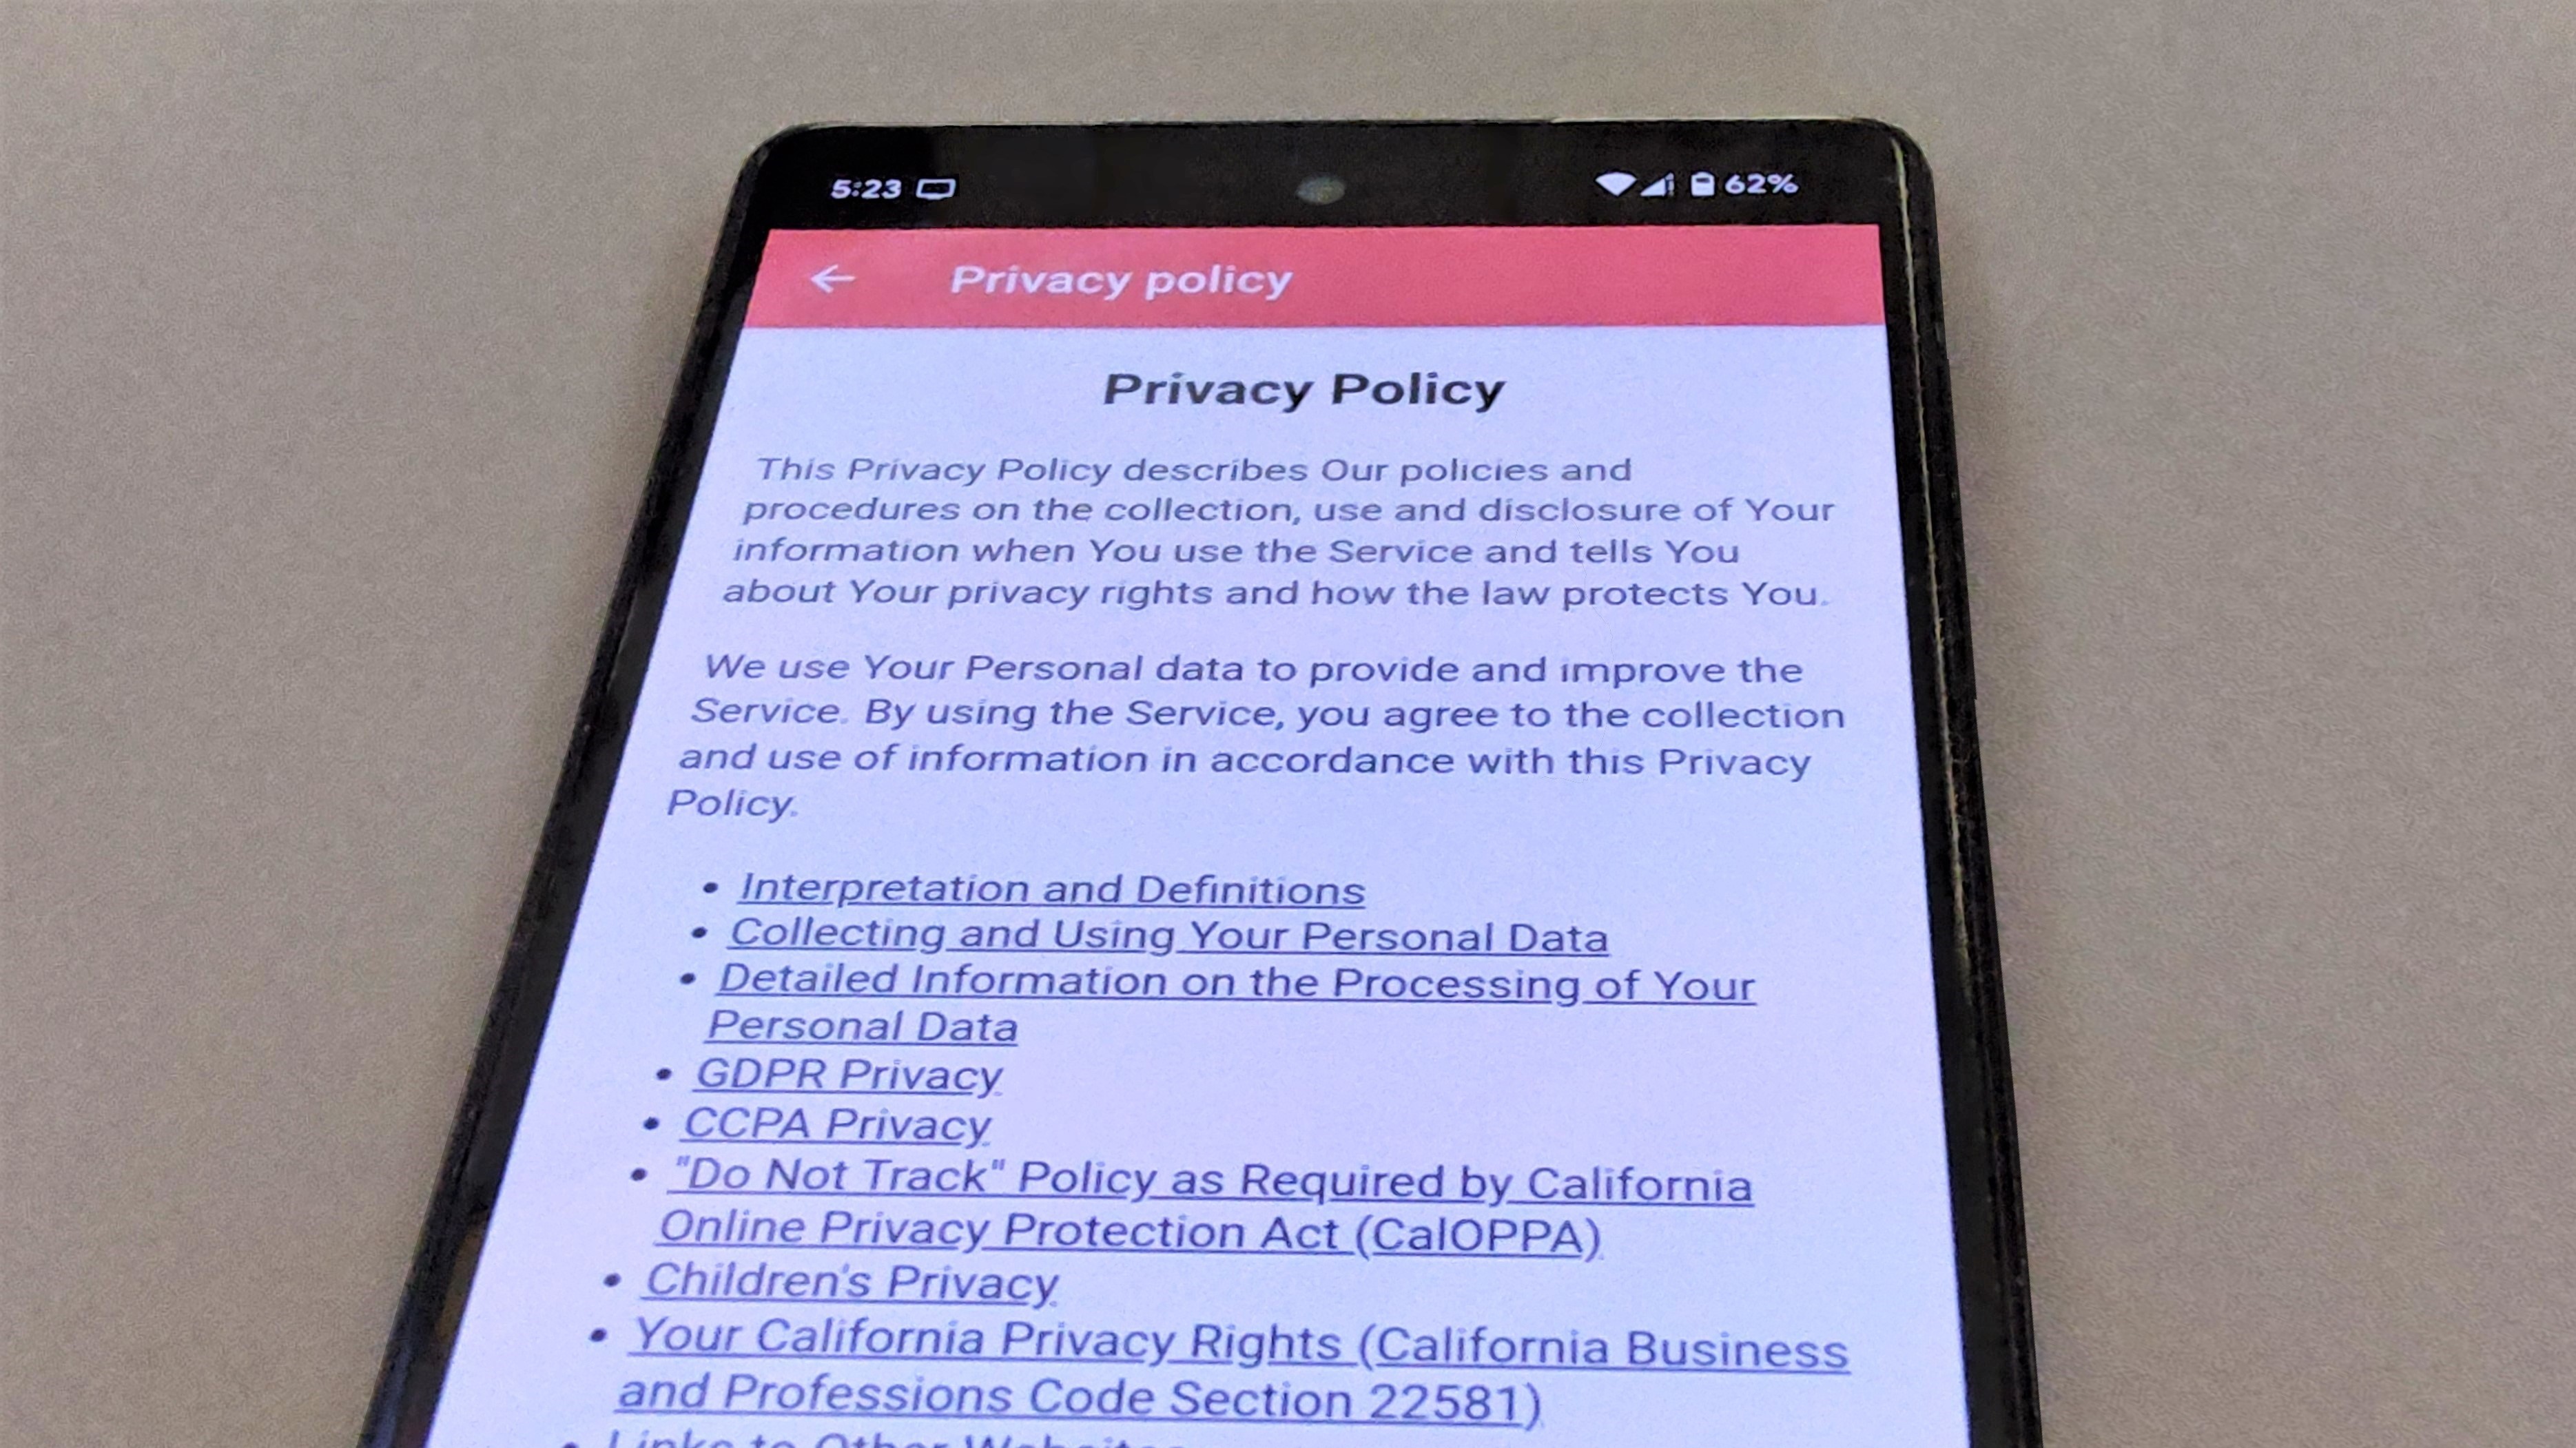 My Calendar period tracking app privacy policy on an Android phone